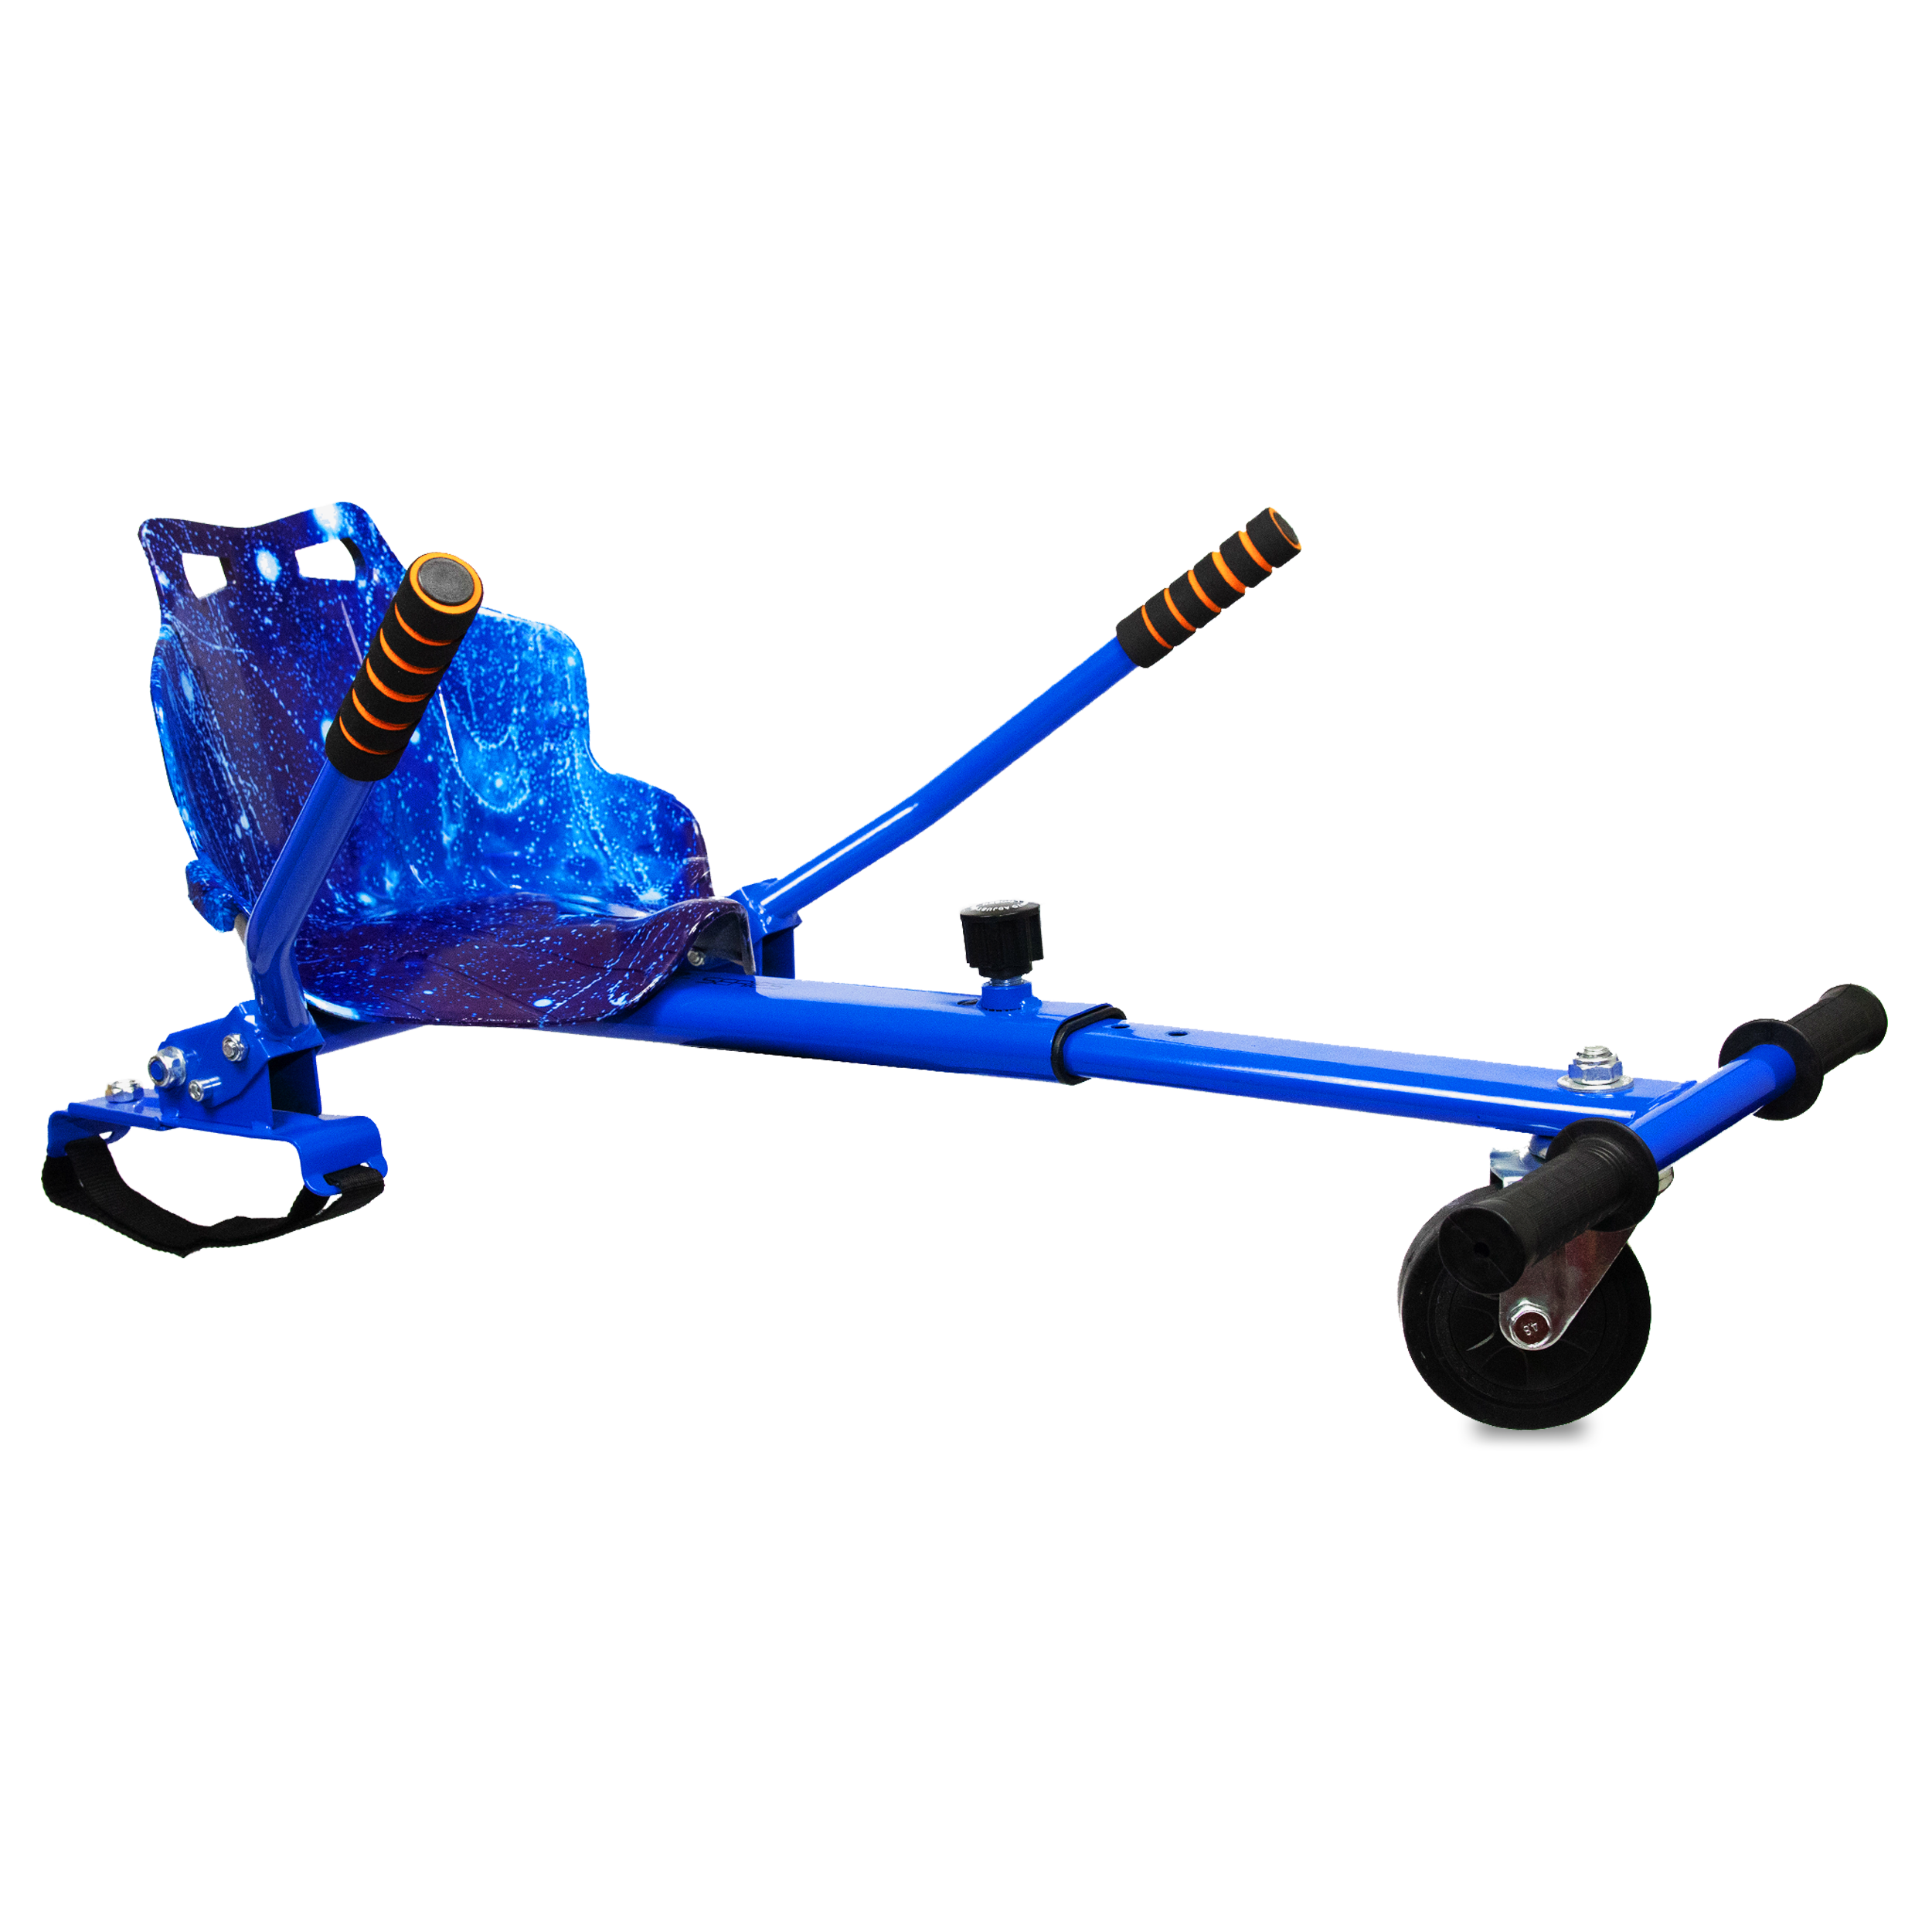 Blue hoverkart conversion kit with a Galaxy sports seat and orange-striped handlebars